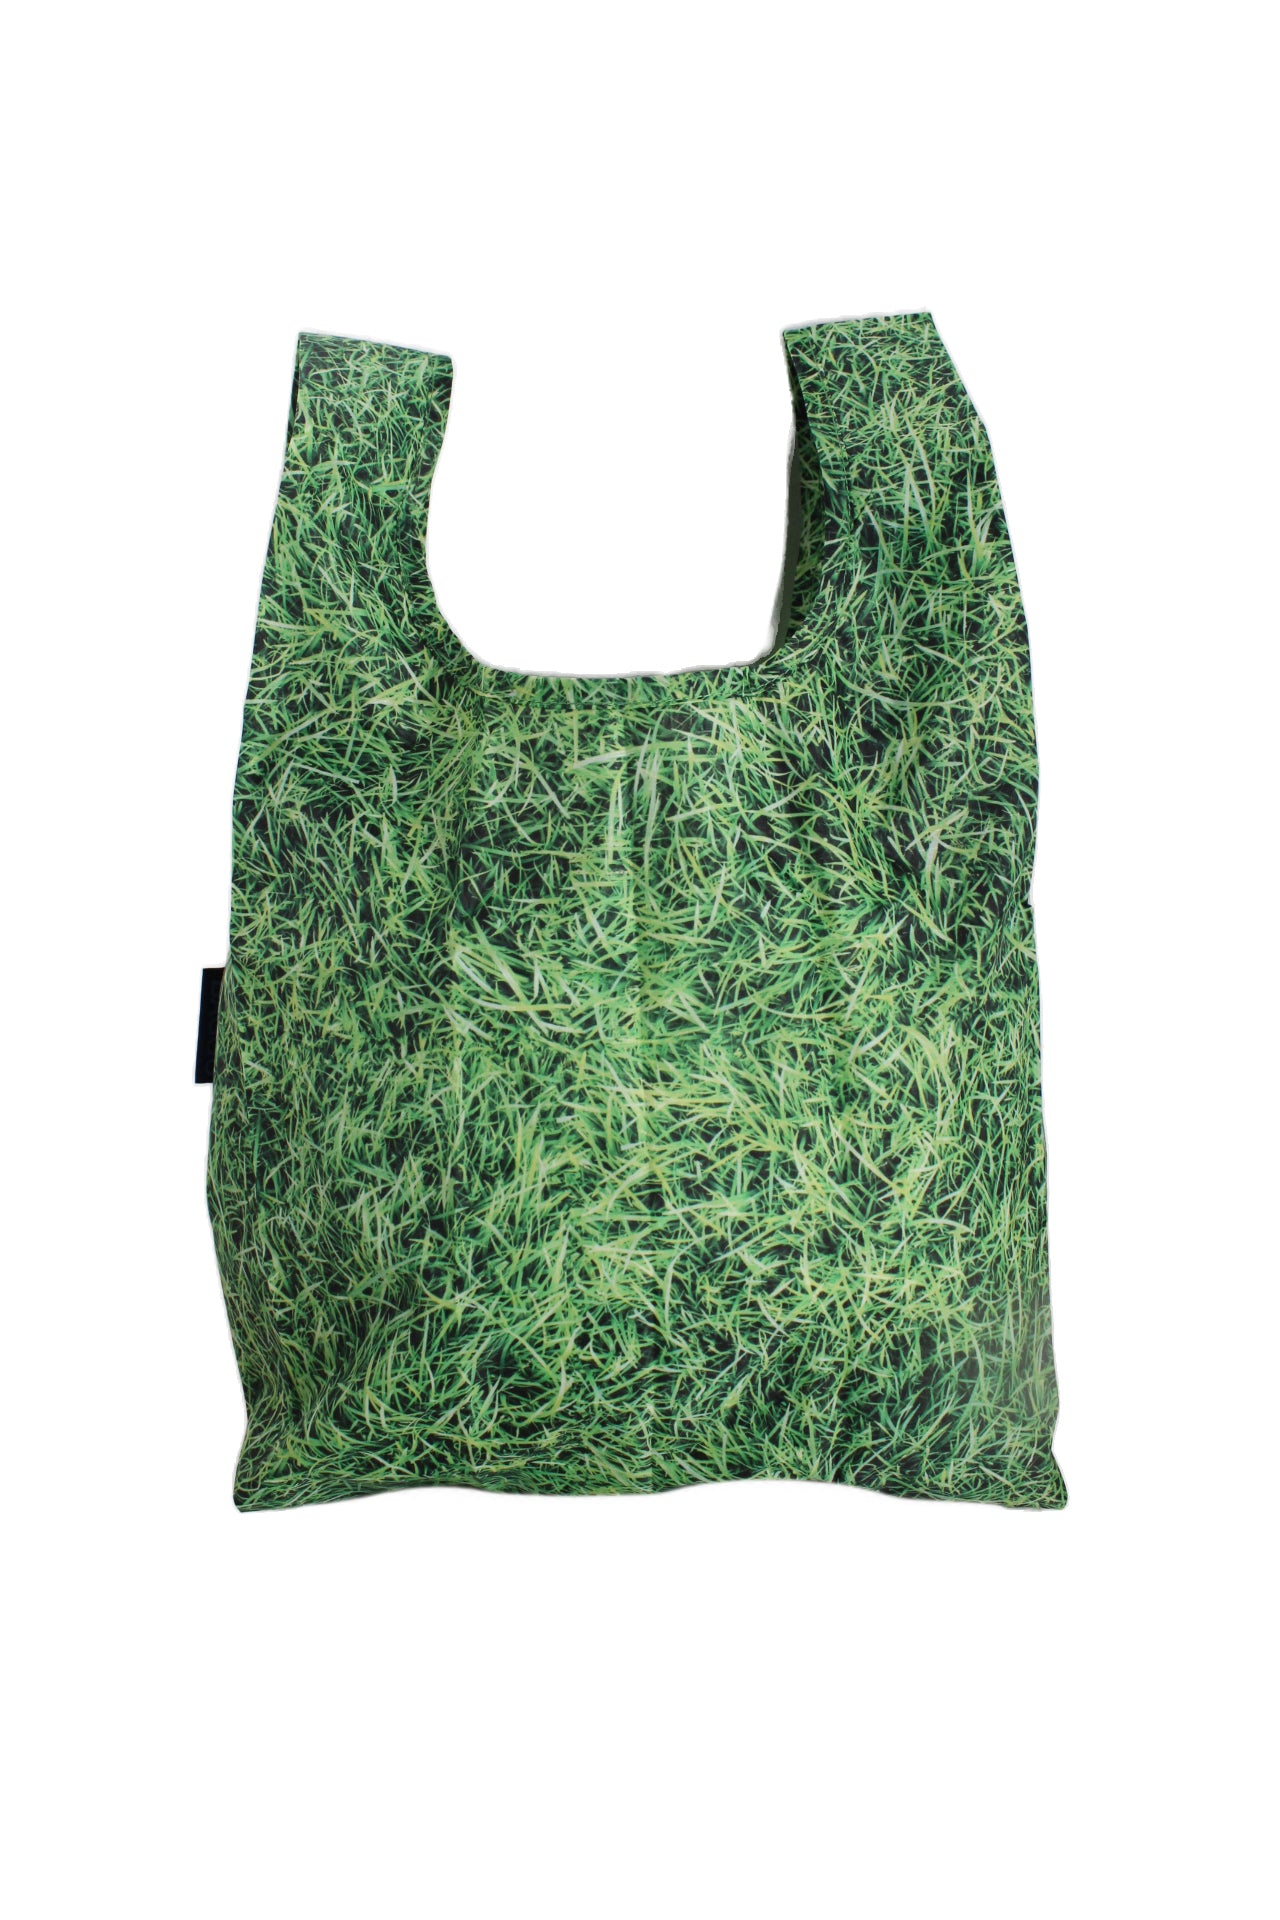 baby grass tote